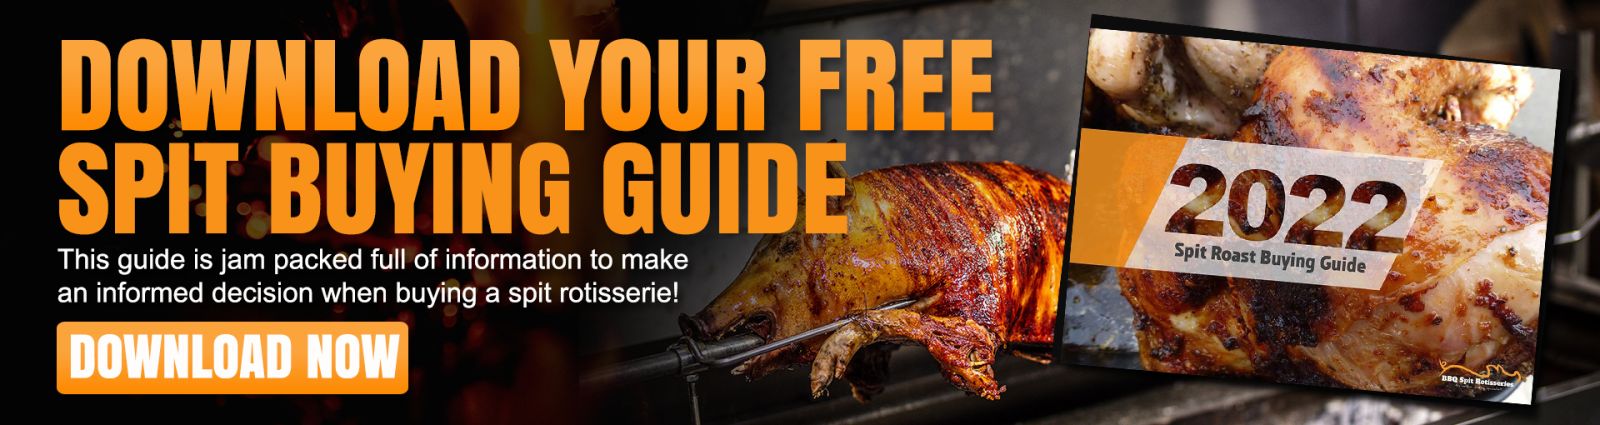 This is a picture of the spit roast buying guide that links to a page where you can download the guide